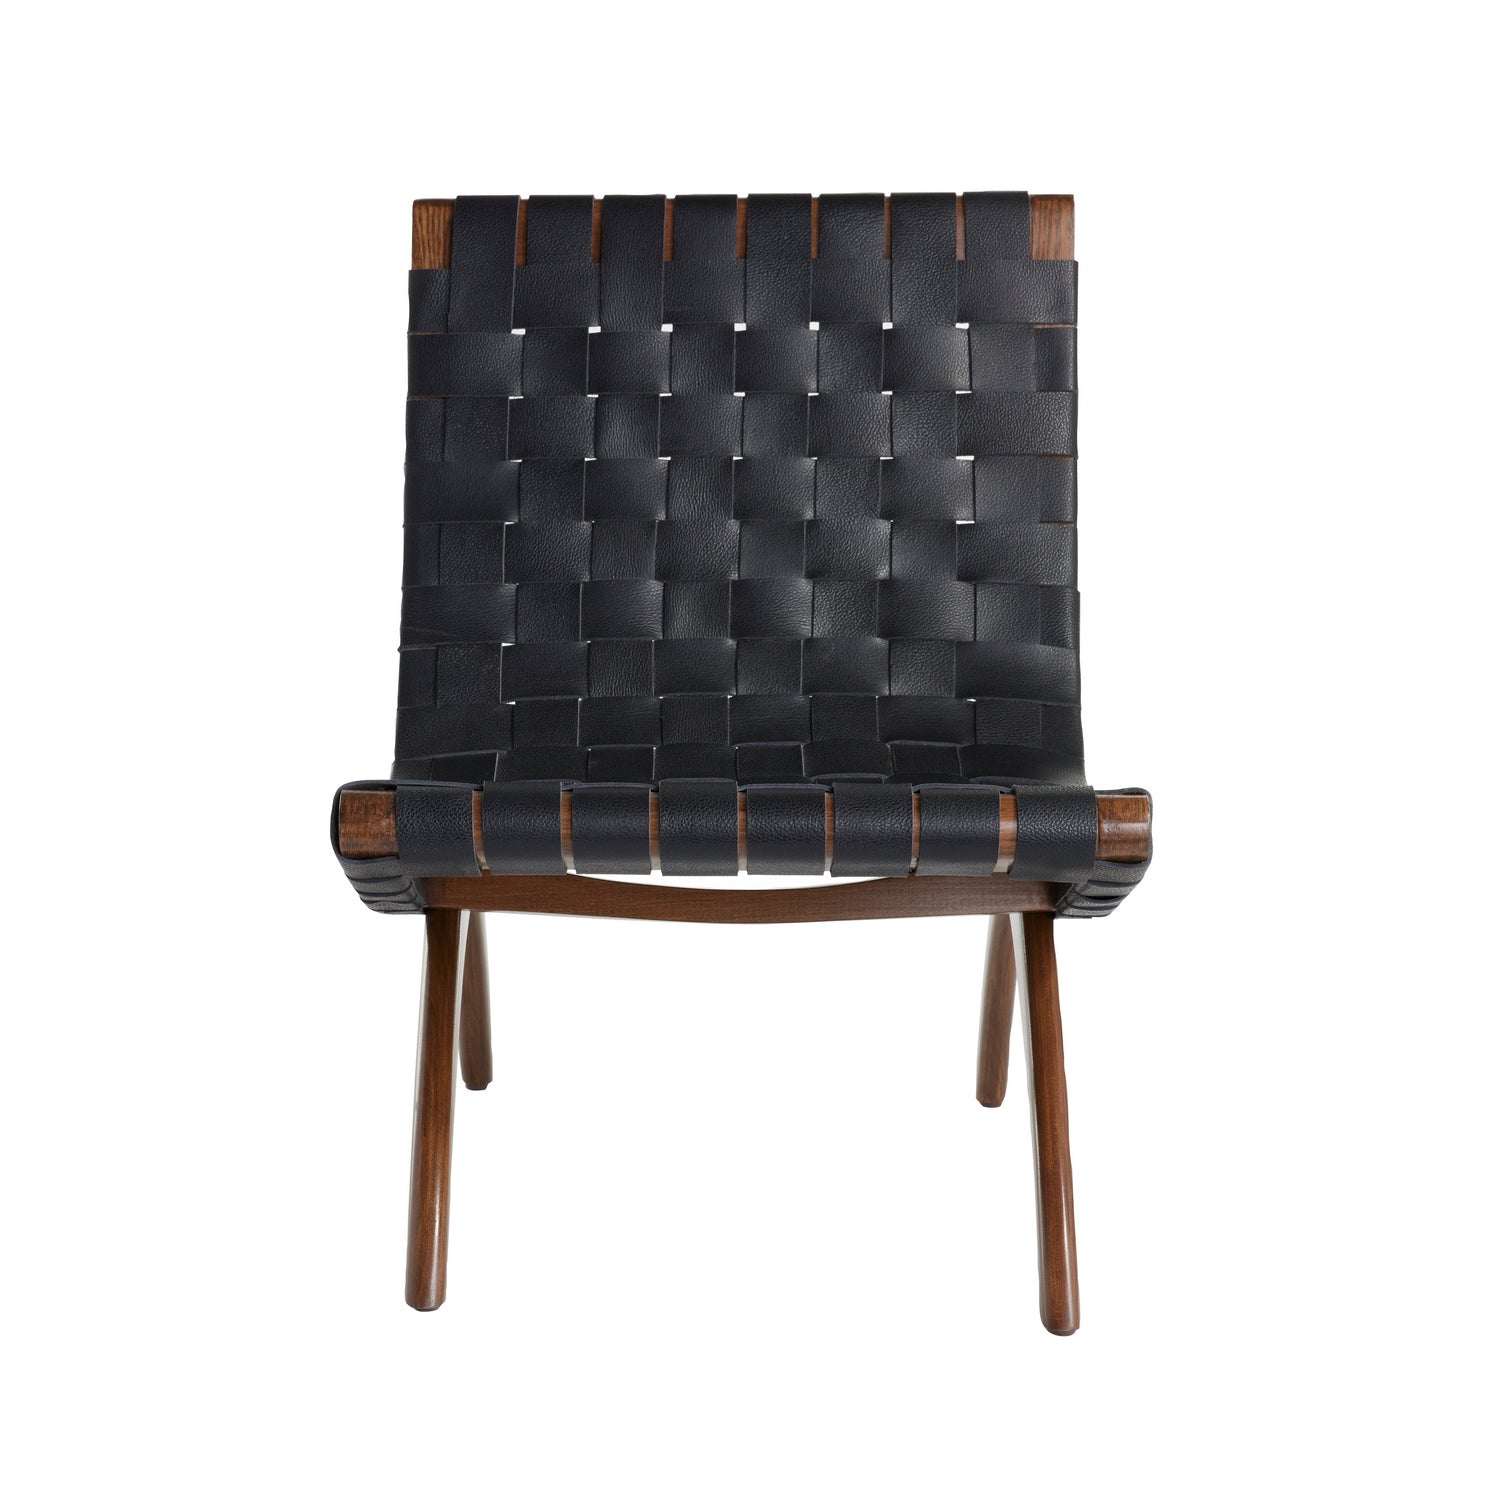 Chair from the Lloyd collection in Black finish